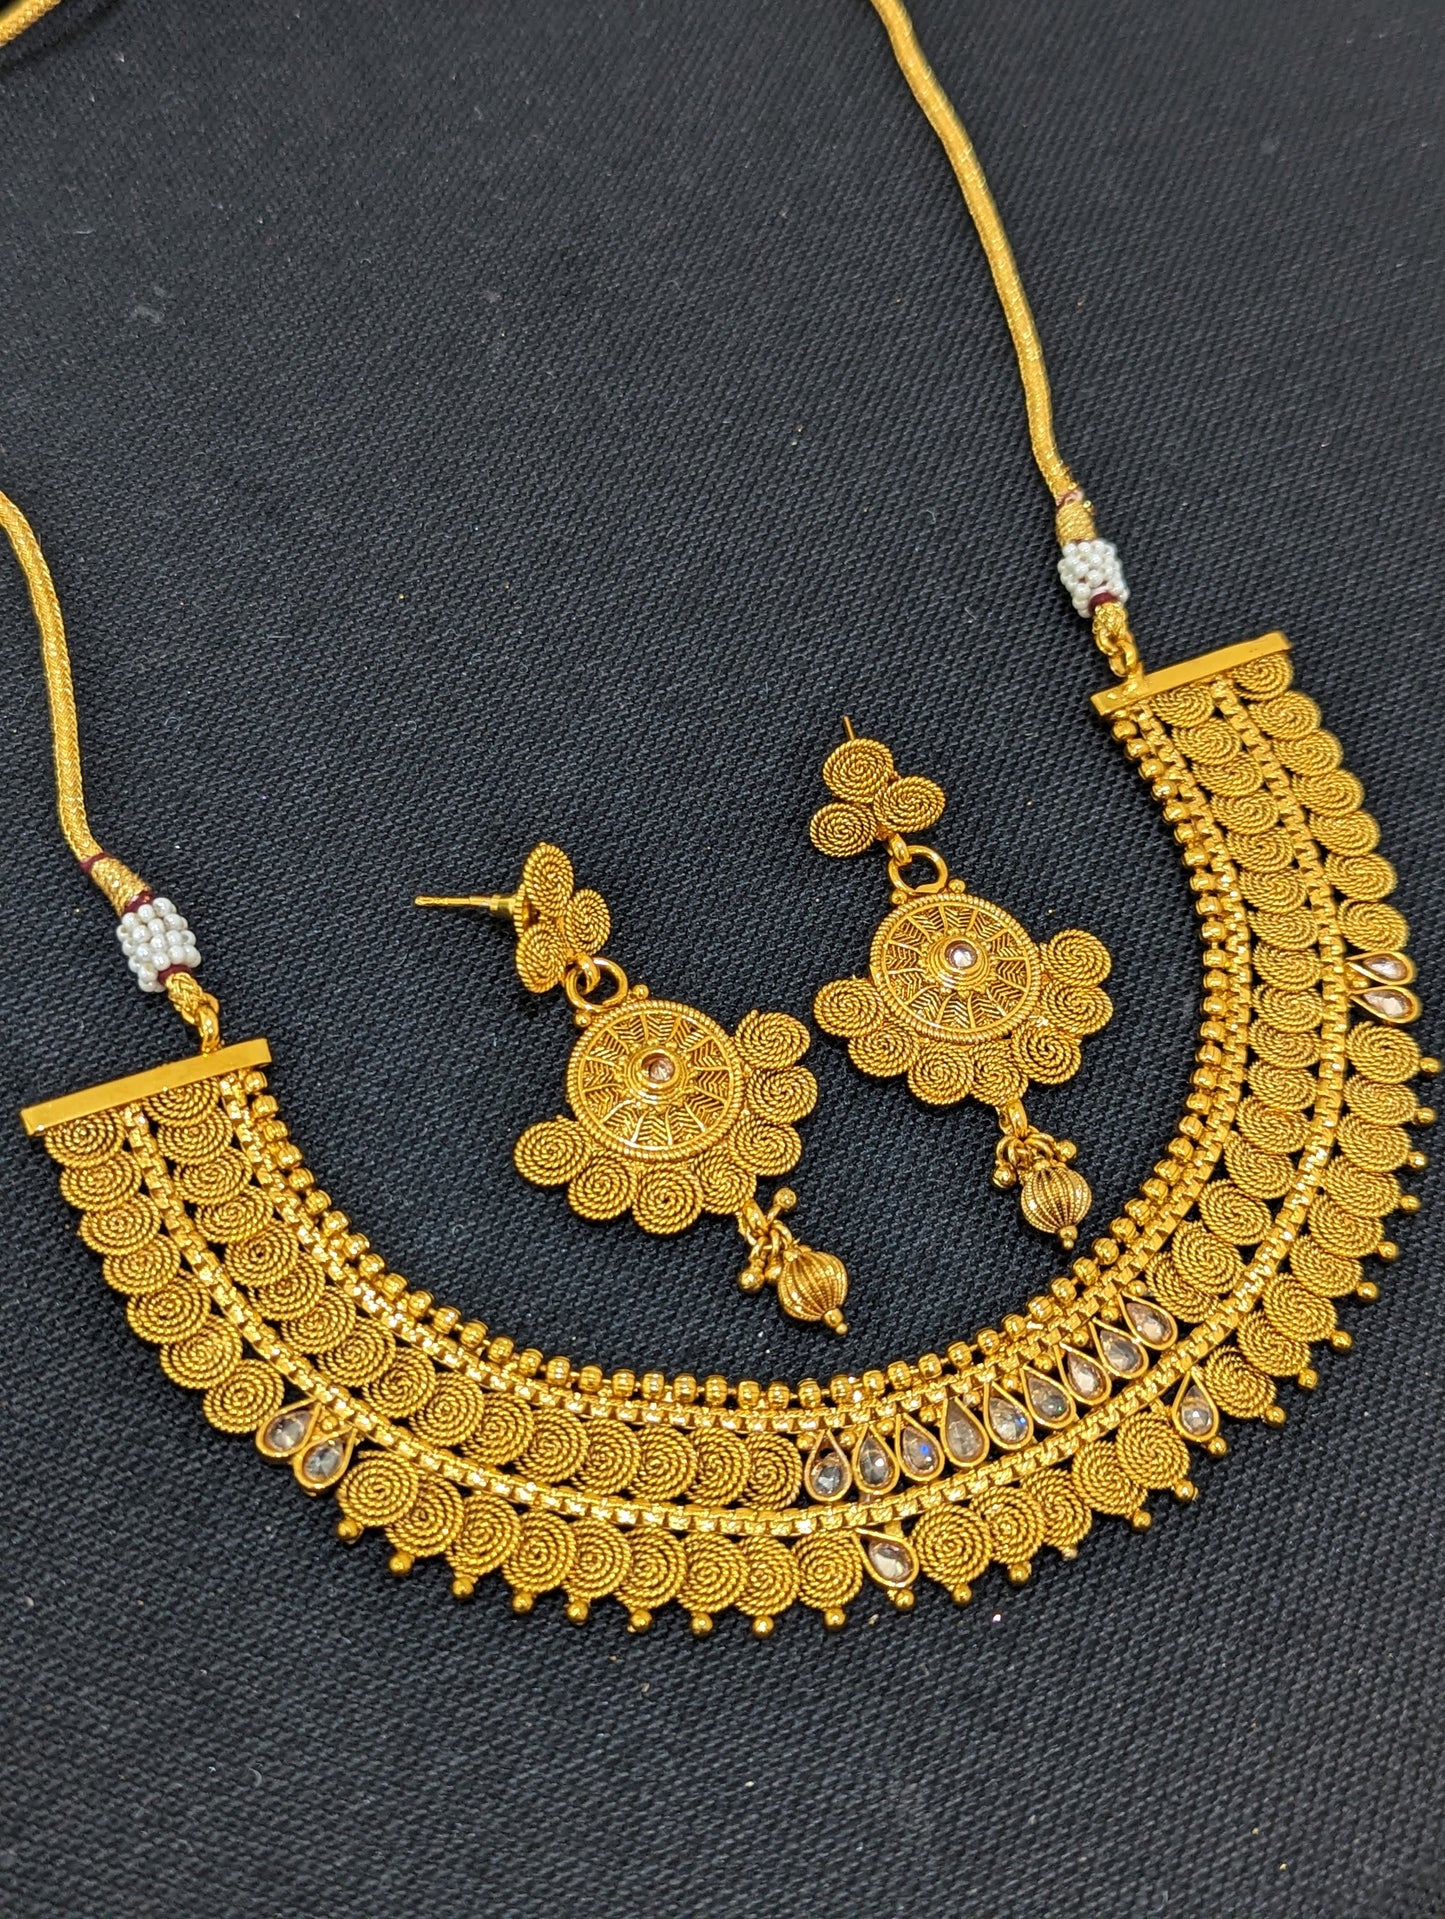 Real gold replica design Choker Necklace and Earrings set - Design 4